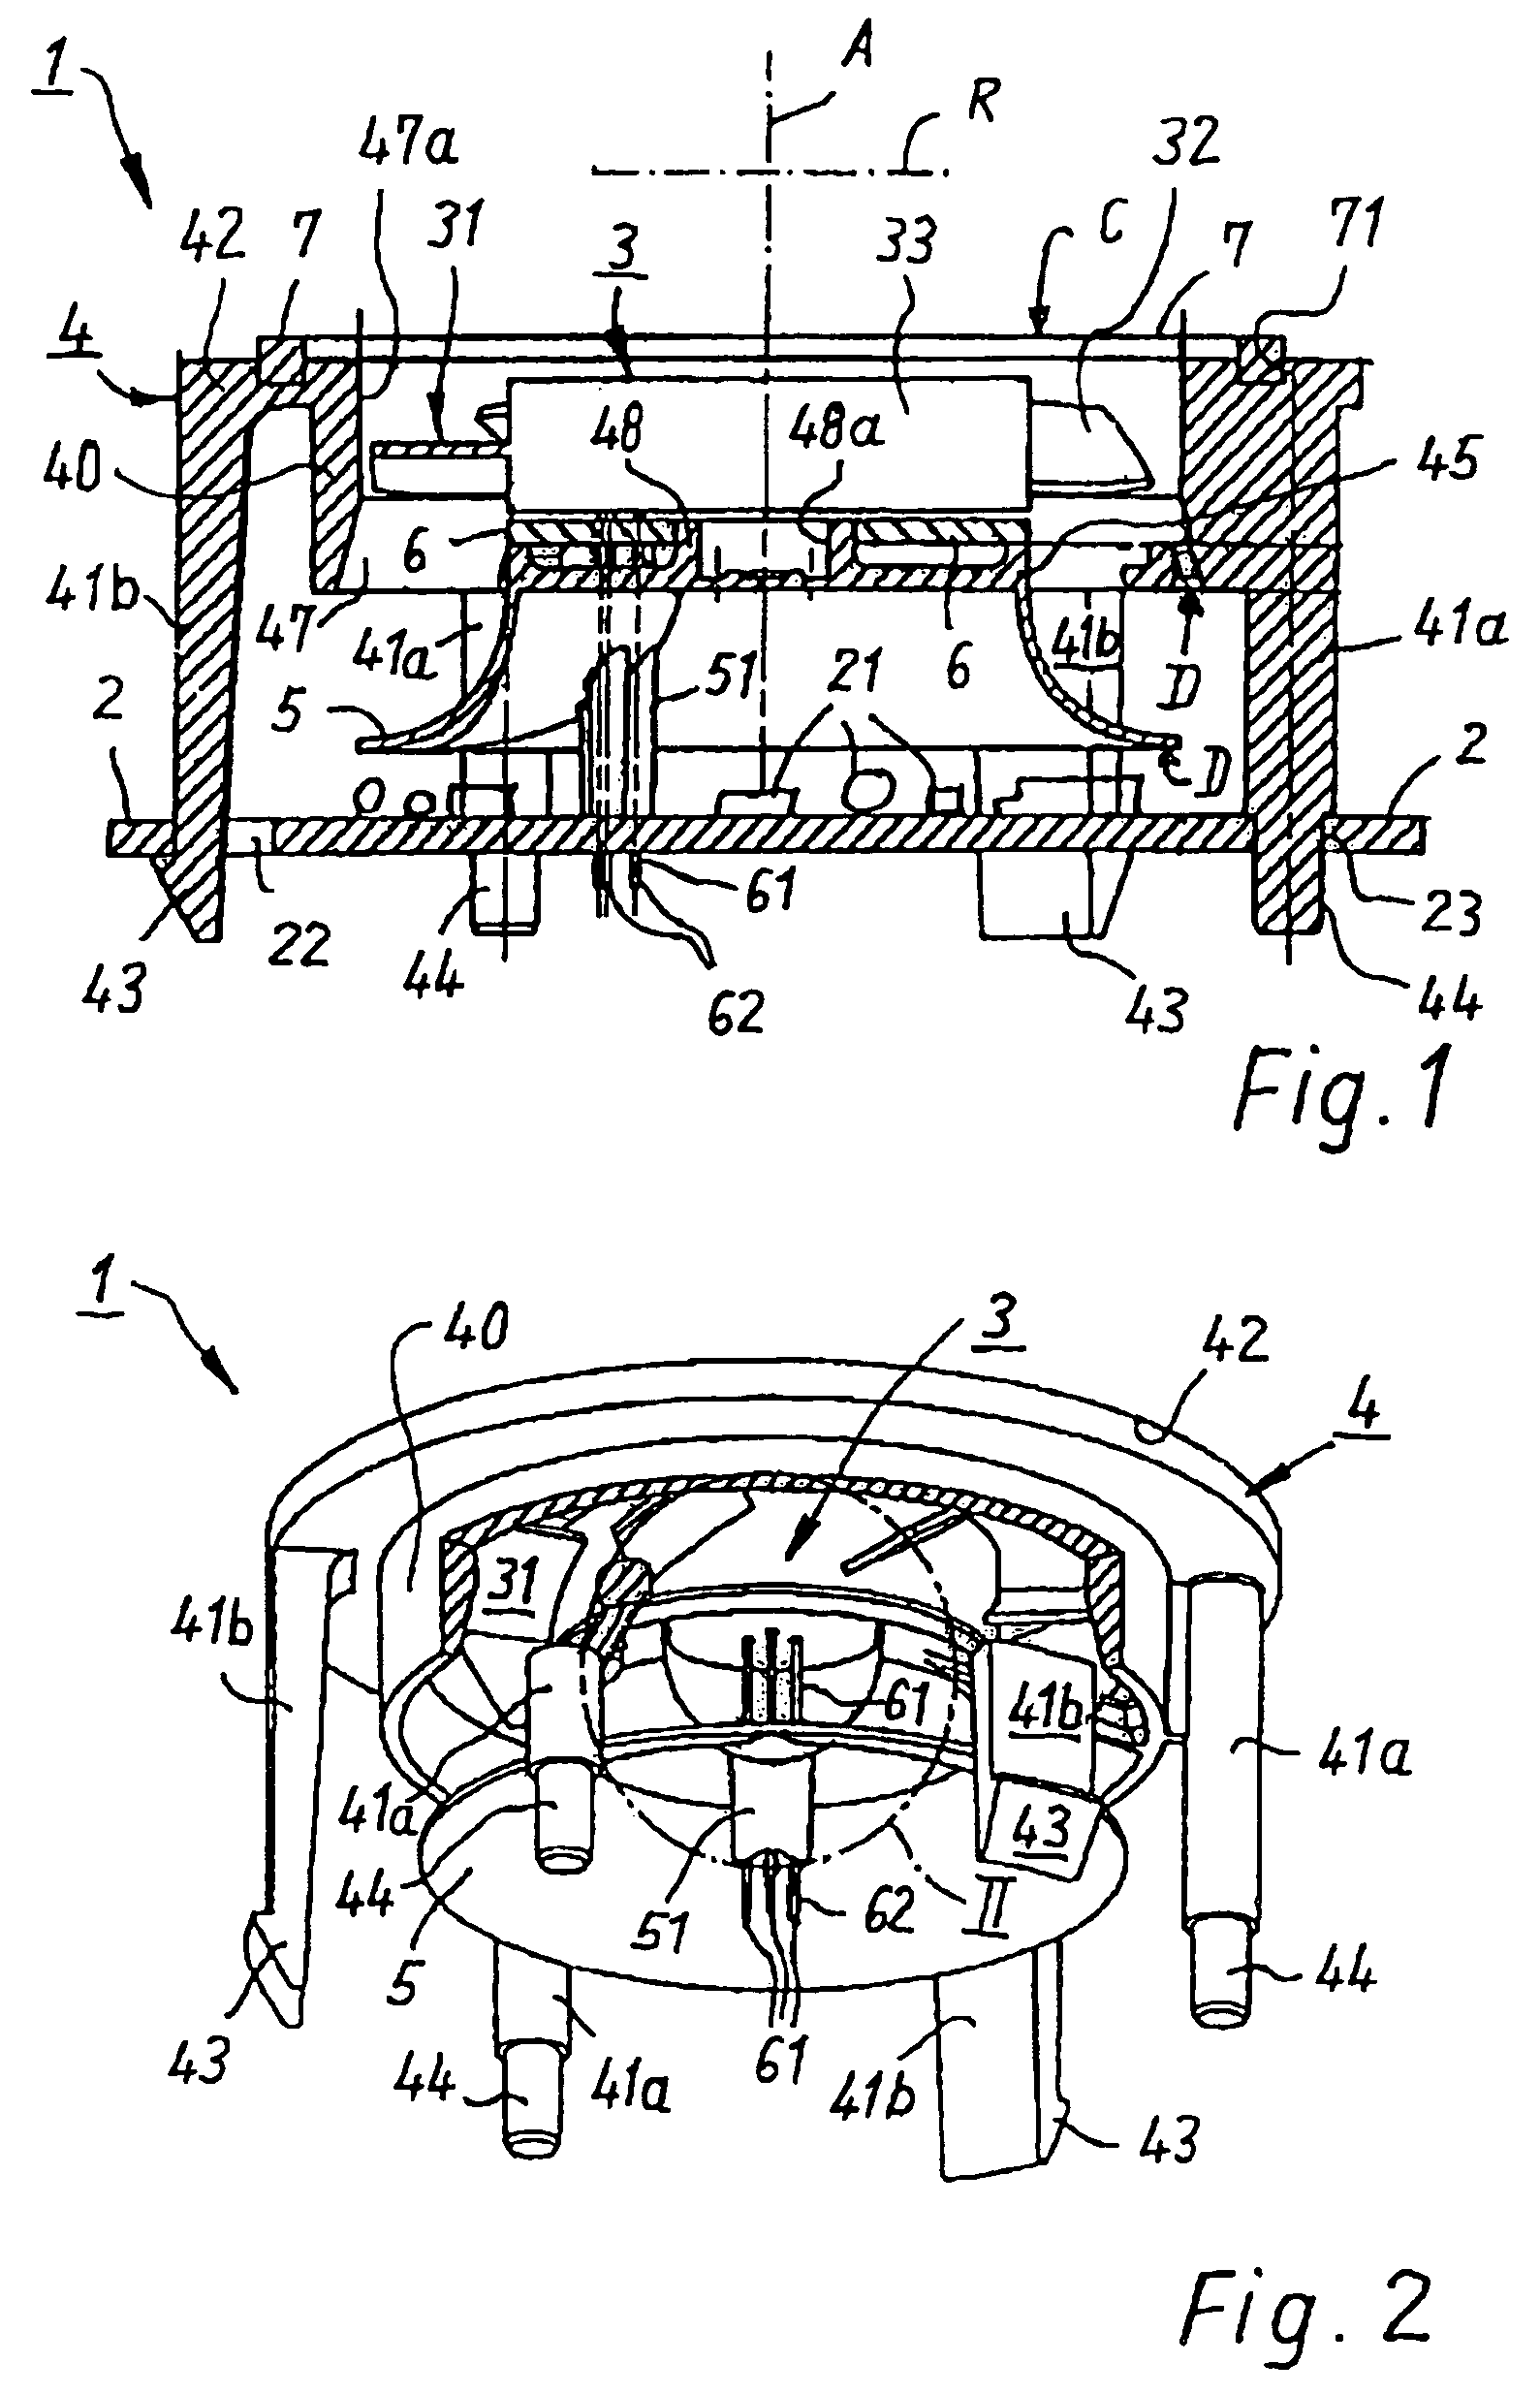 Assembly used for cooling a circuit board or similar